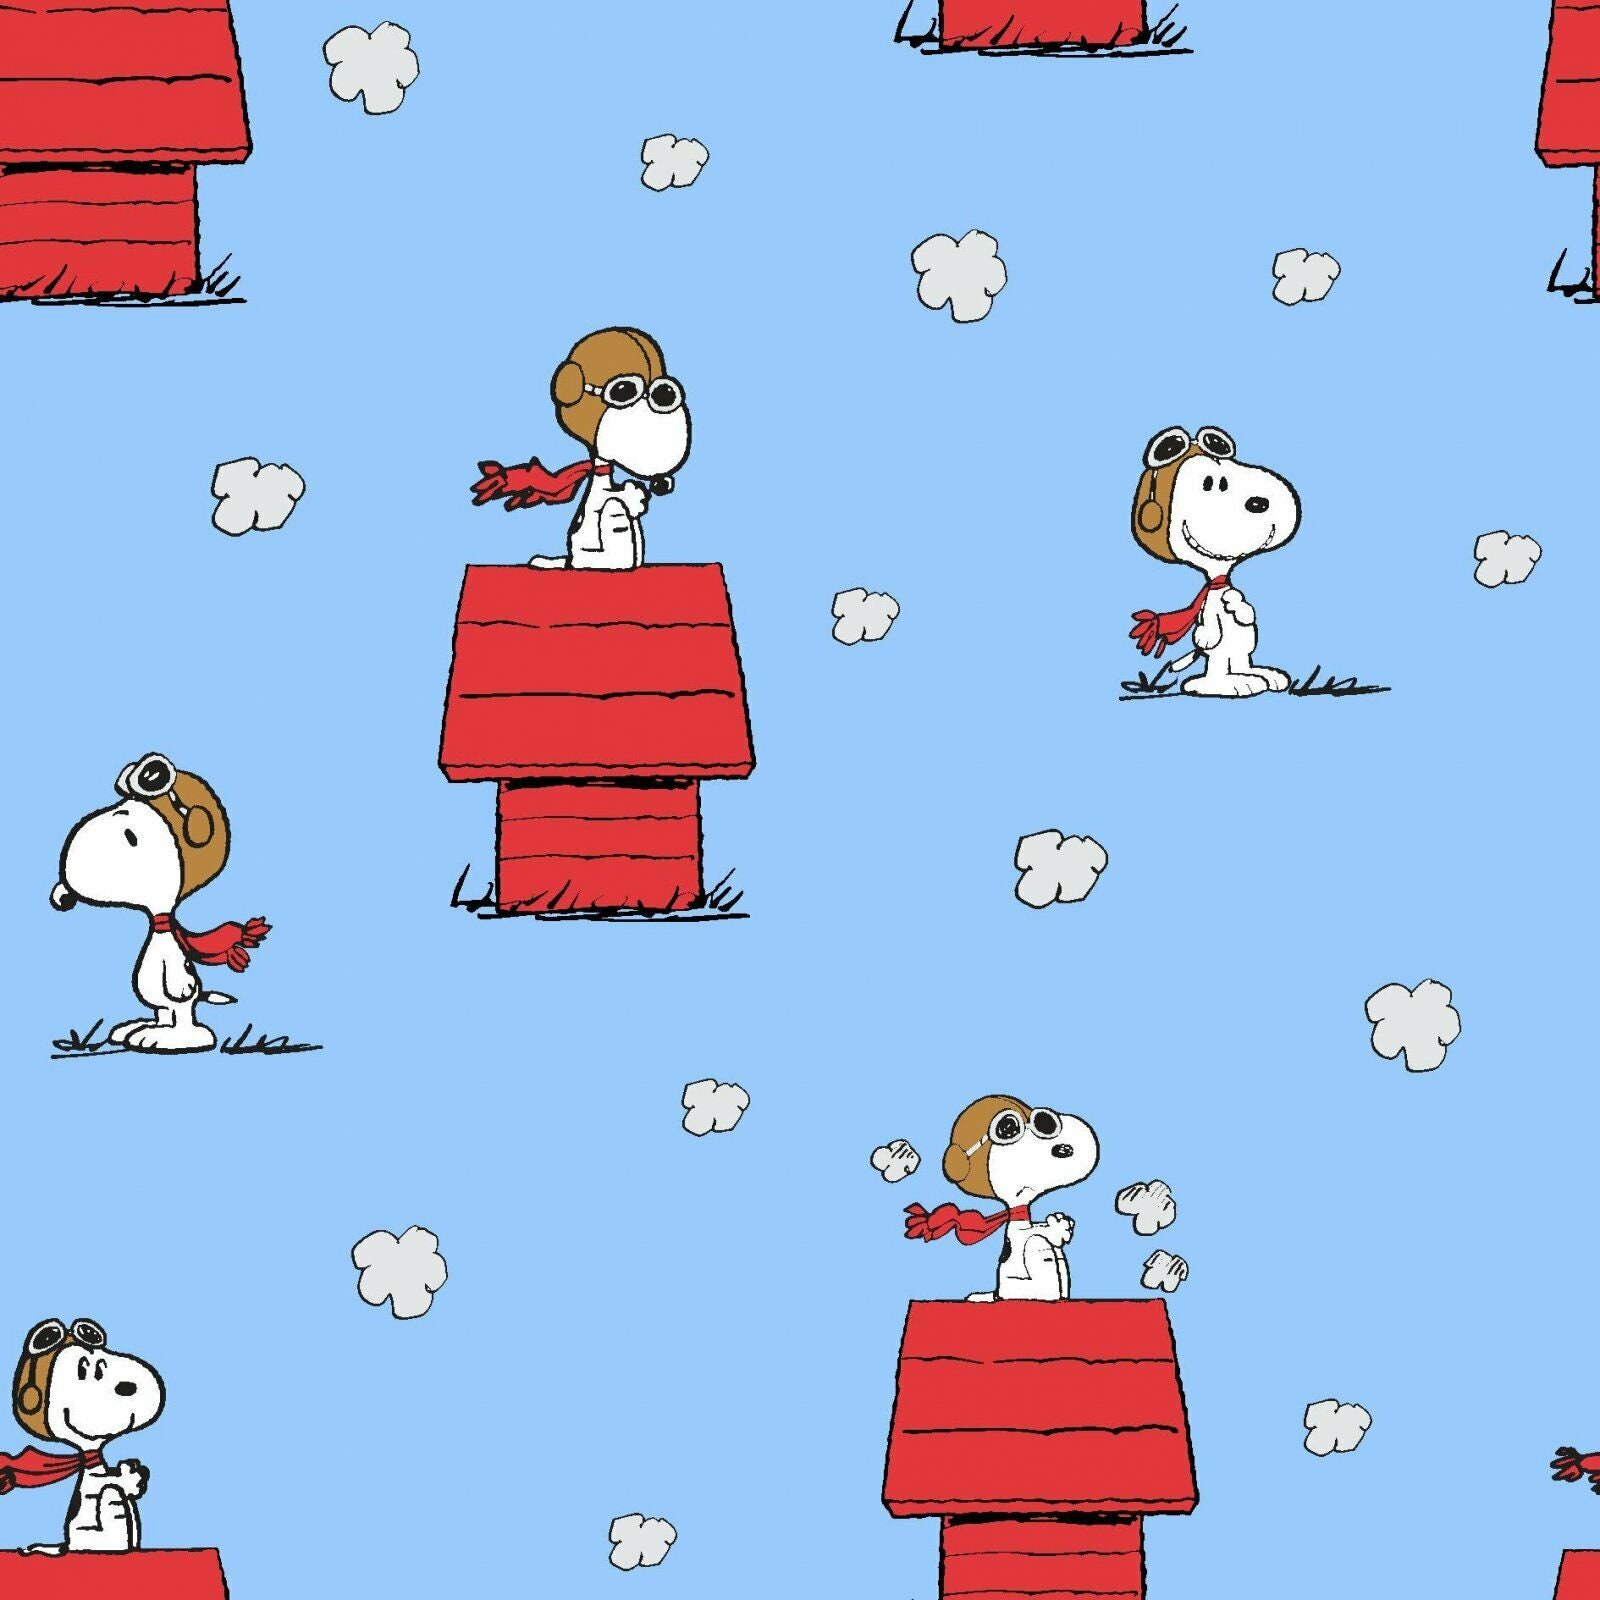 Fabric Snoopy Fabric: the Peanuts Red Baron - Etsy